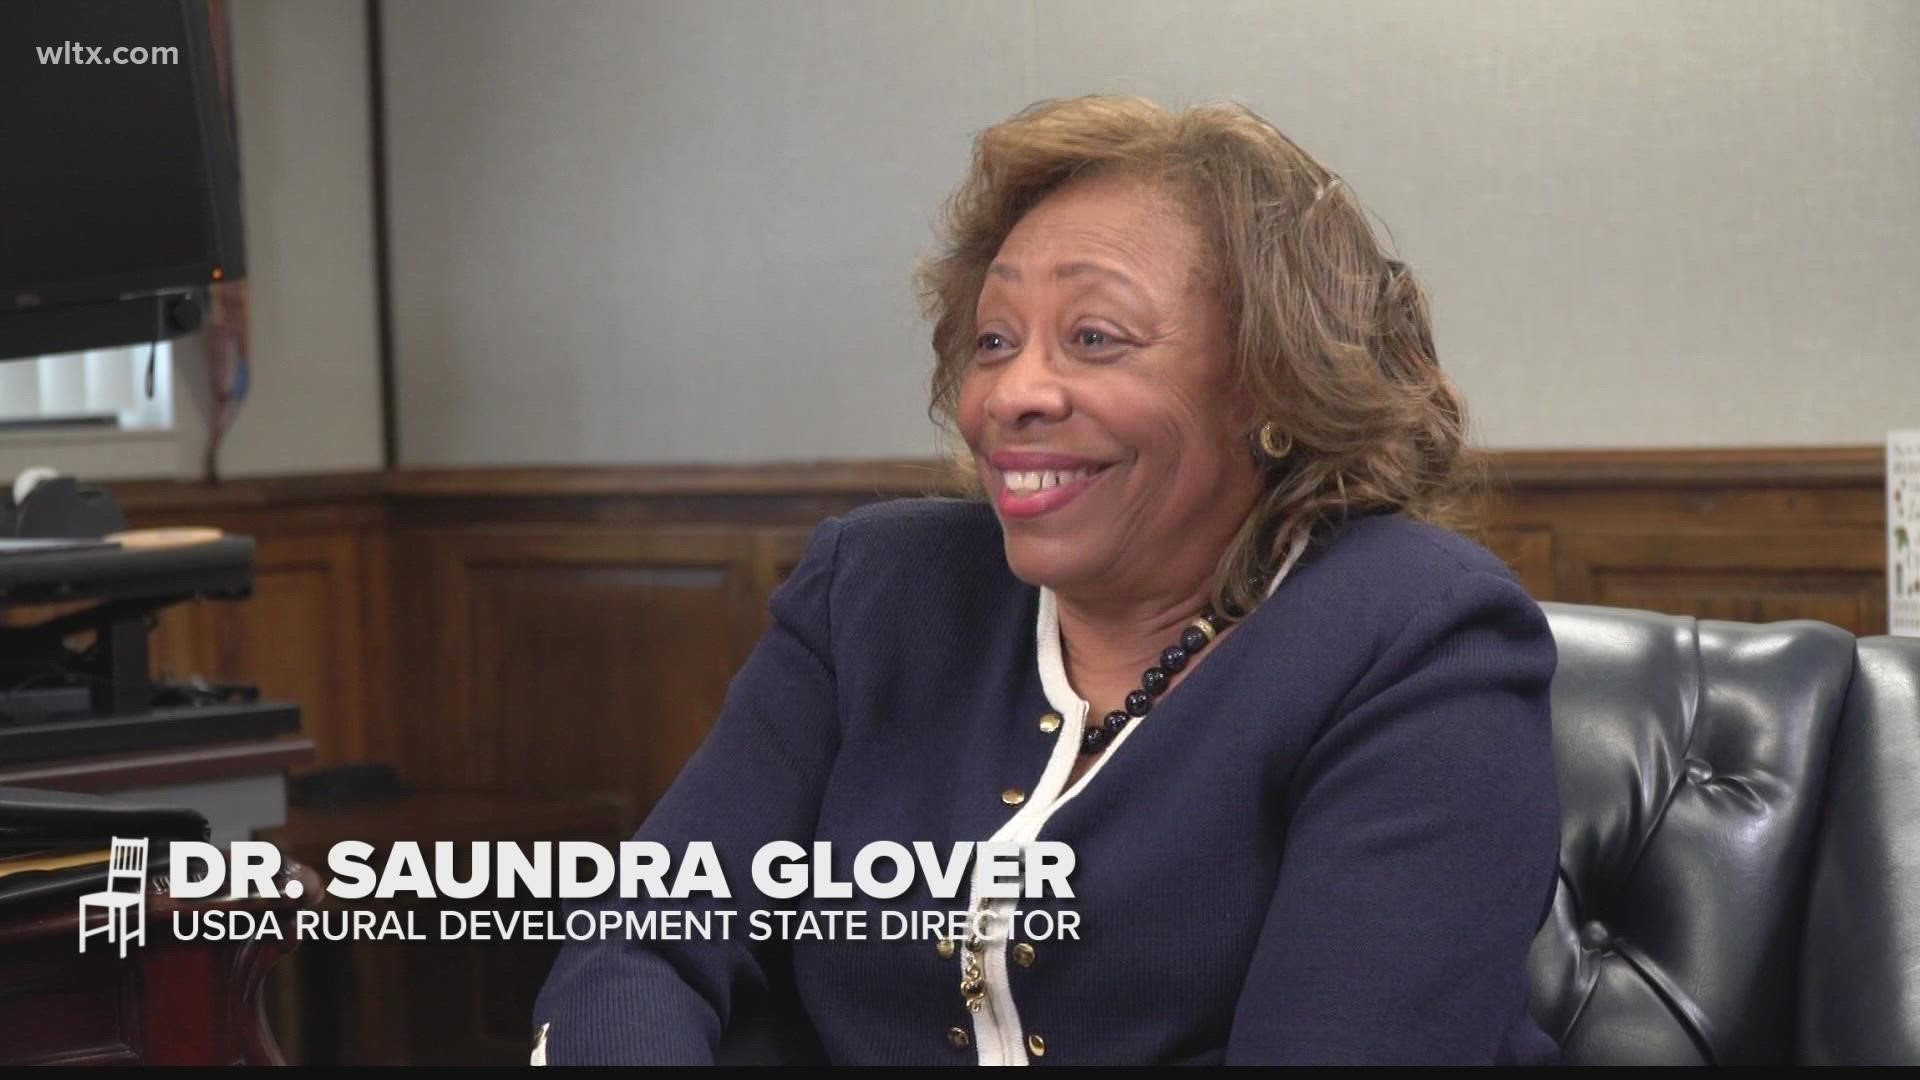 Dr. Saundra H. Glover has been at the forefront of Public Health Practice and Health Equity Initiatives locally, nationally, and internationally.